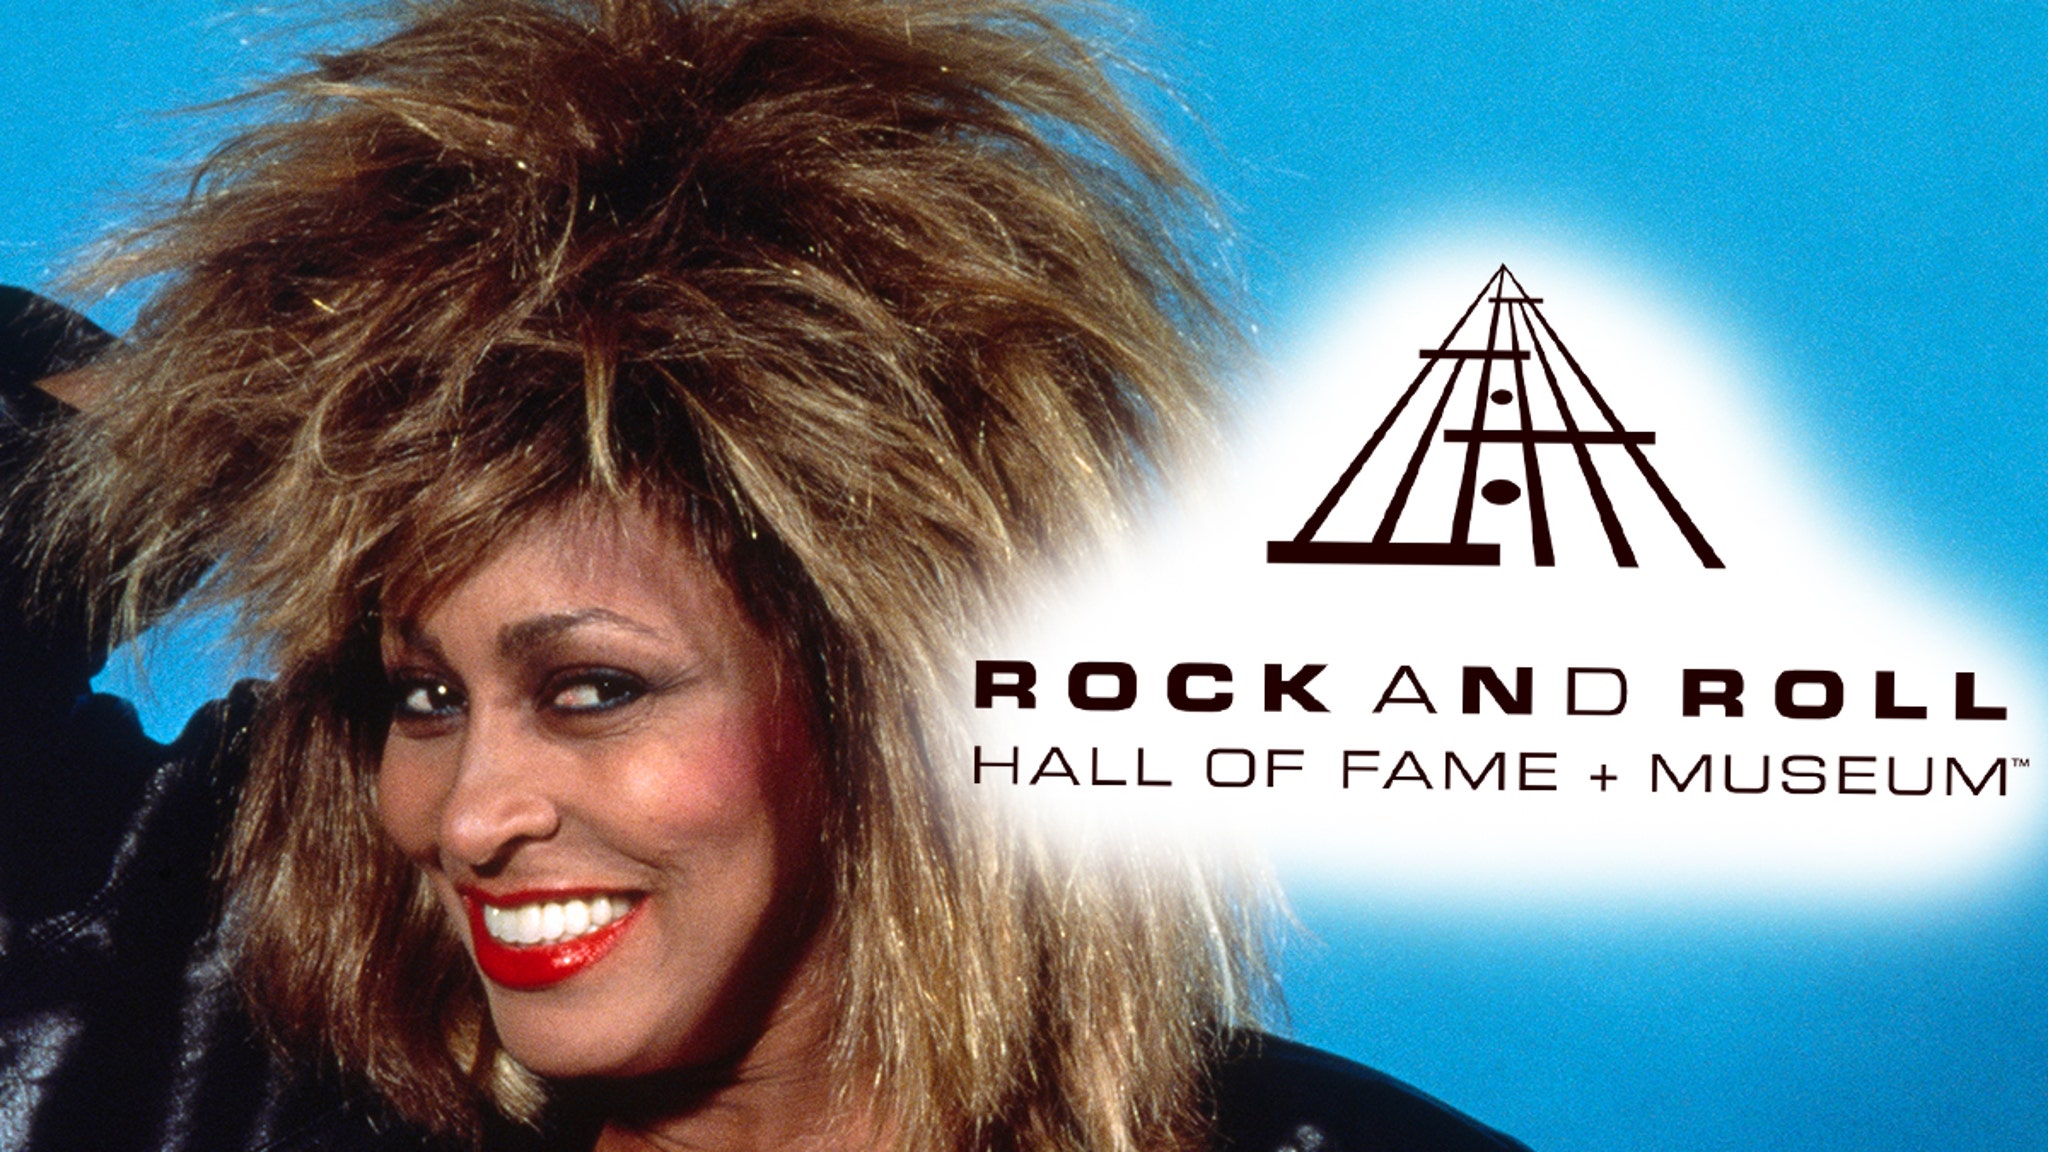 Tina Turner fans are furious because she is not in the Rock & Roll COURT solo